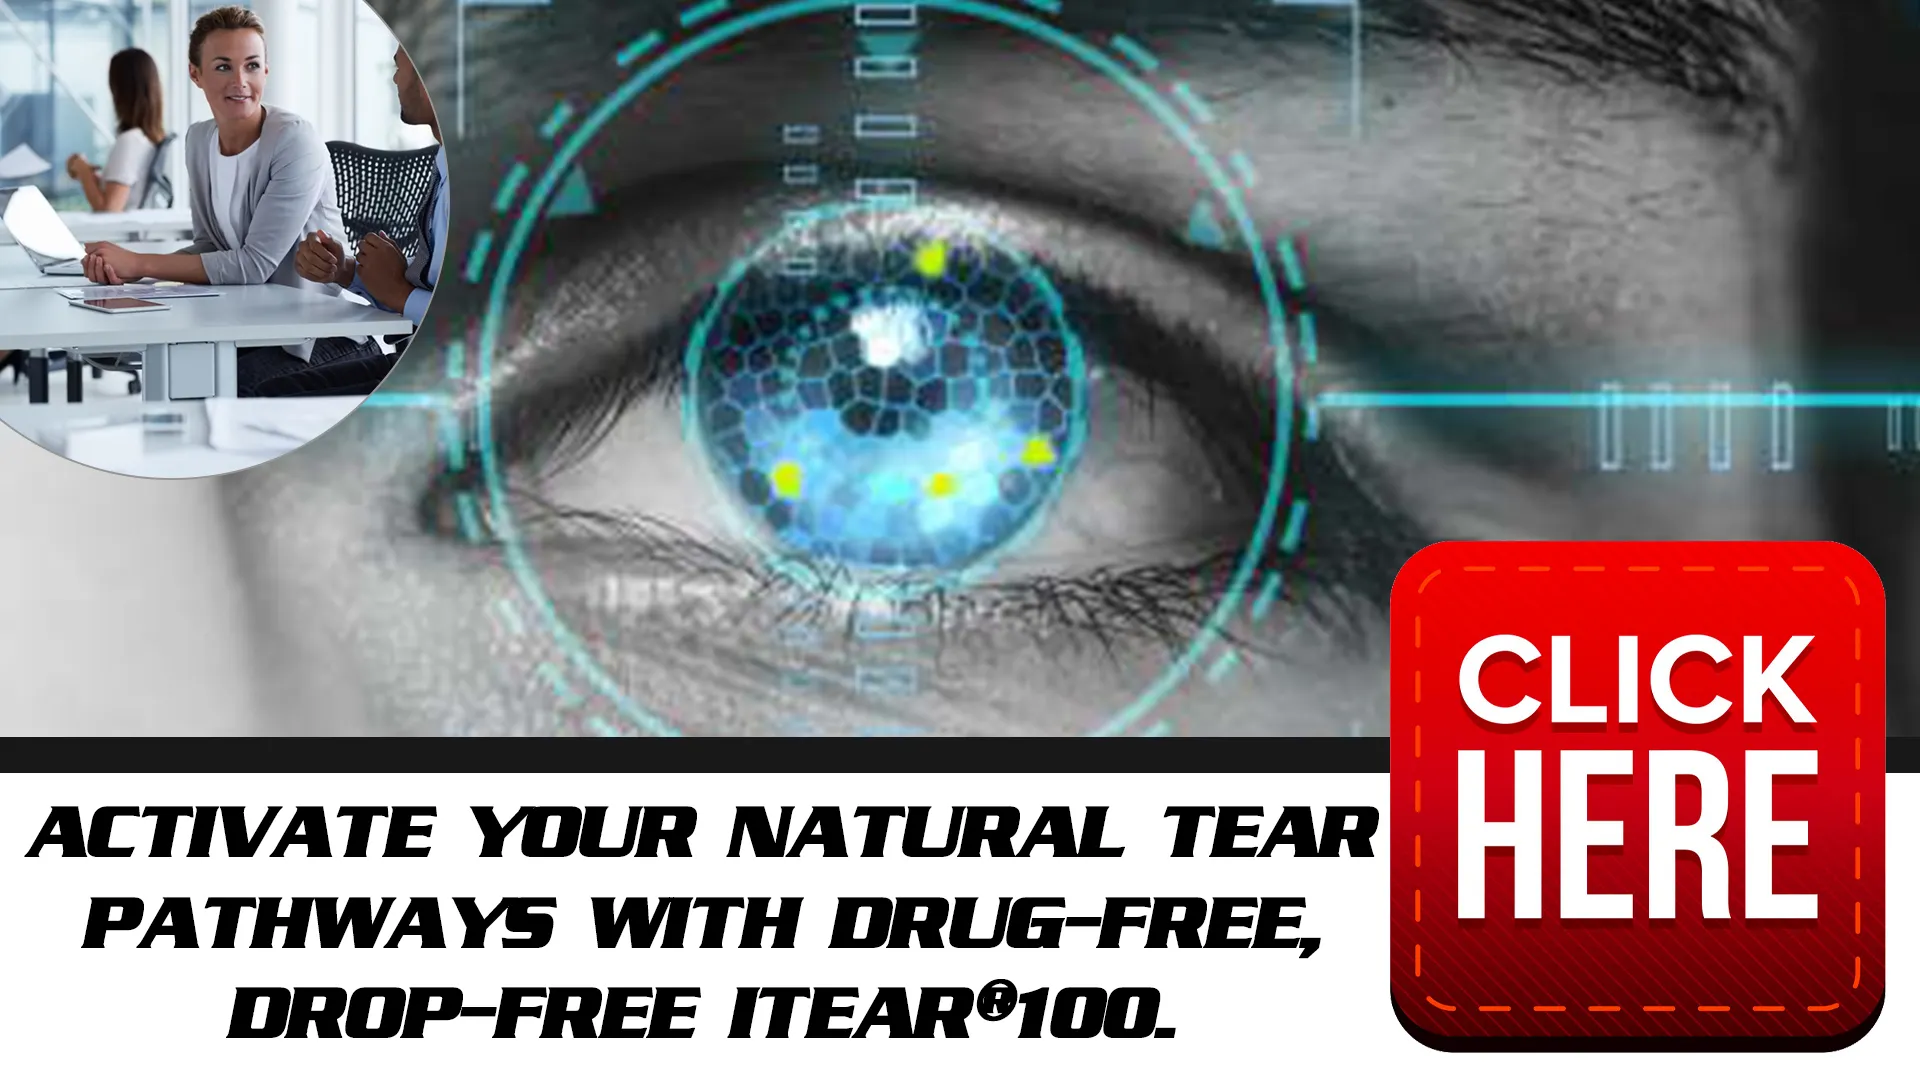 Benefits of Choosing iTEAR100 for Dry Eye Relief